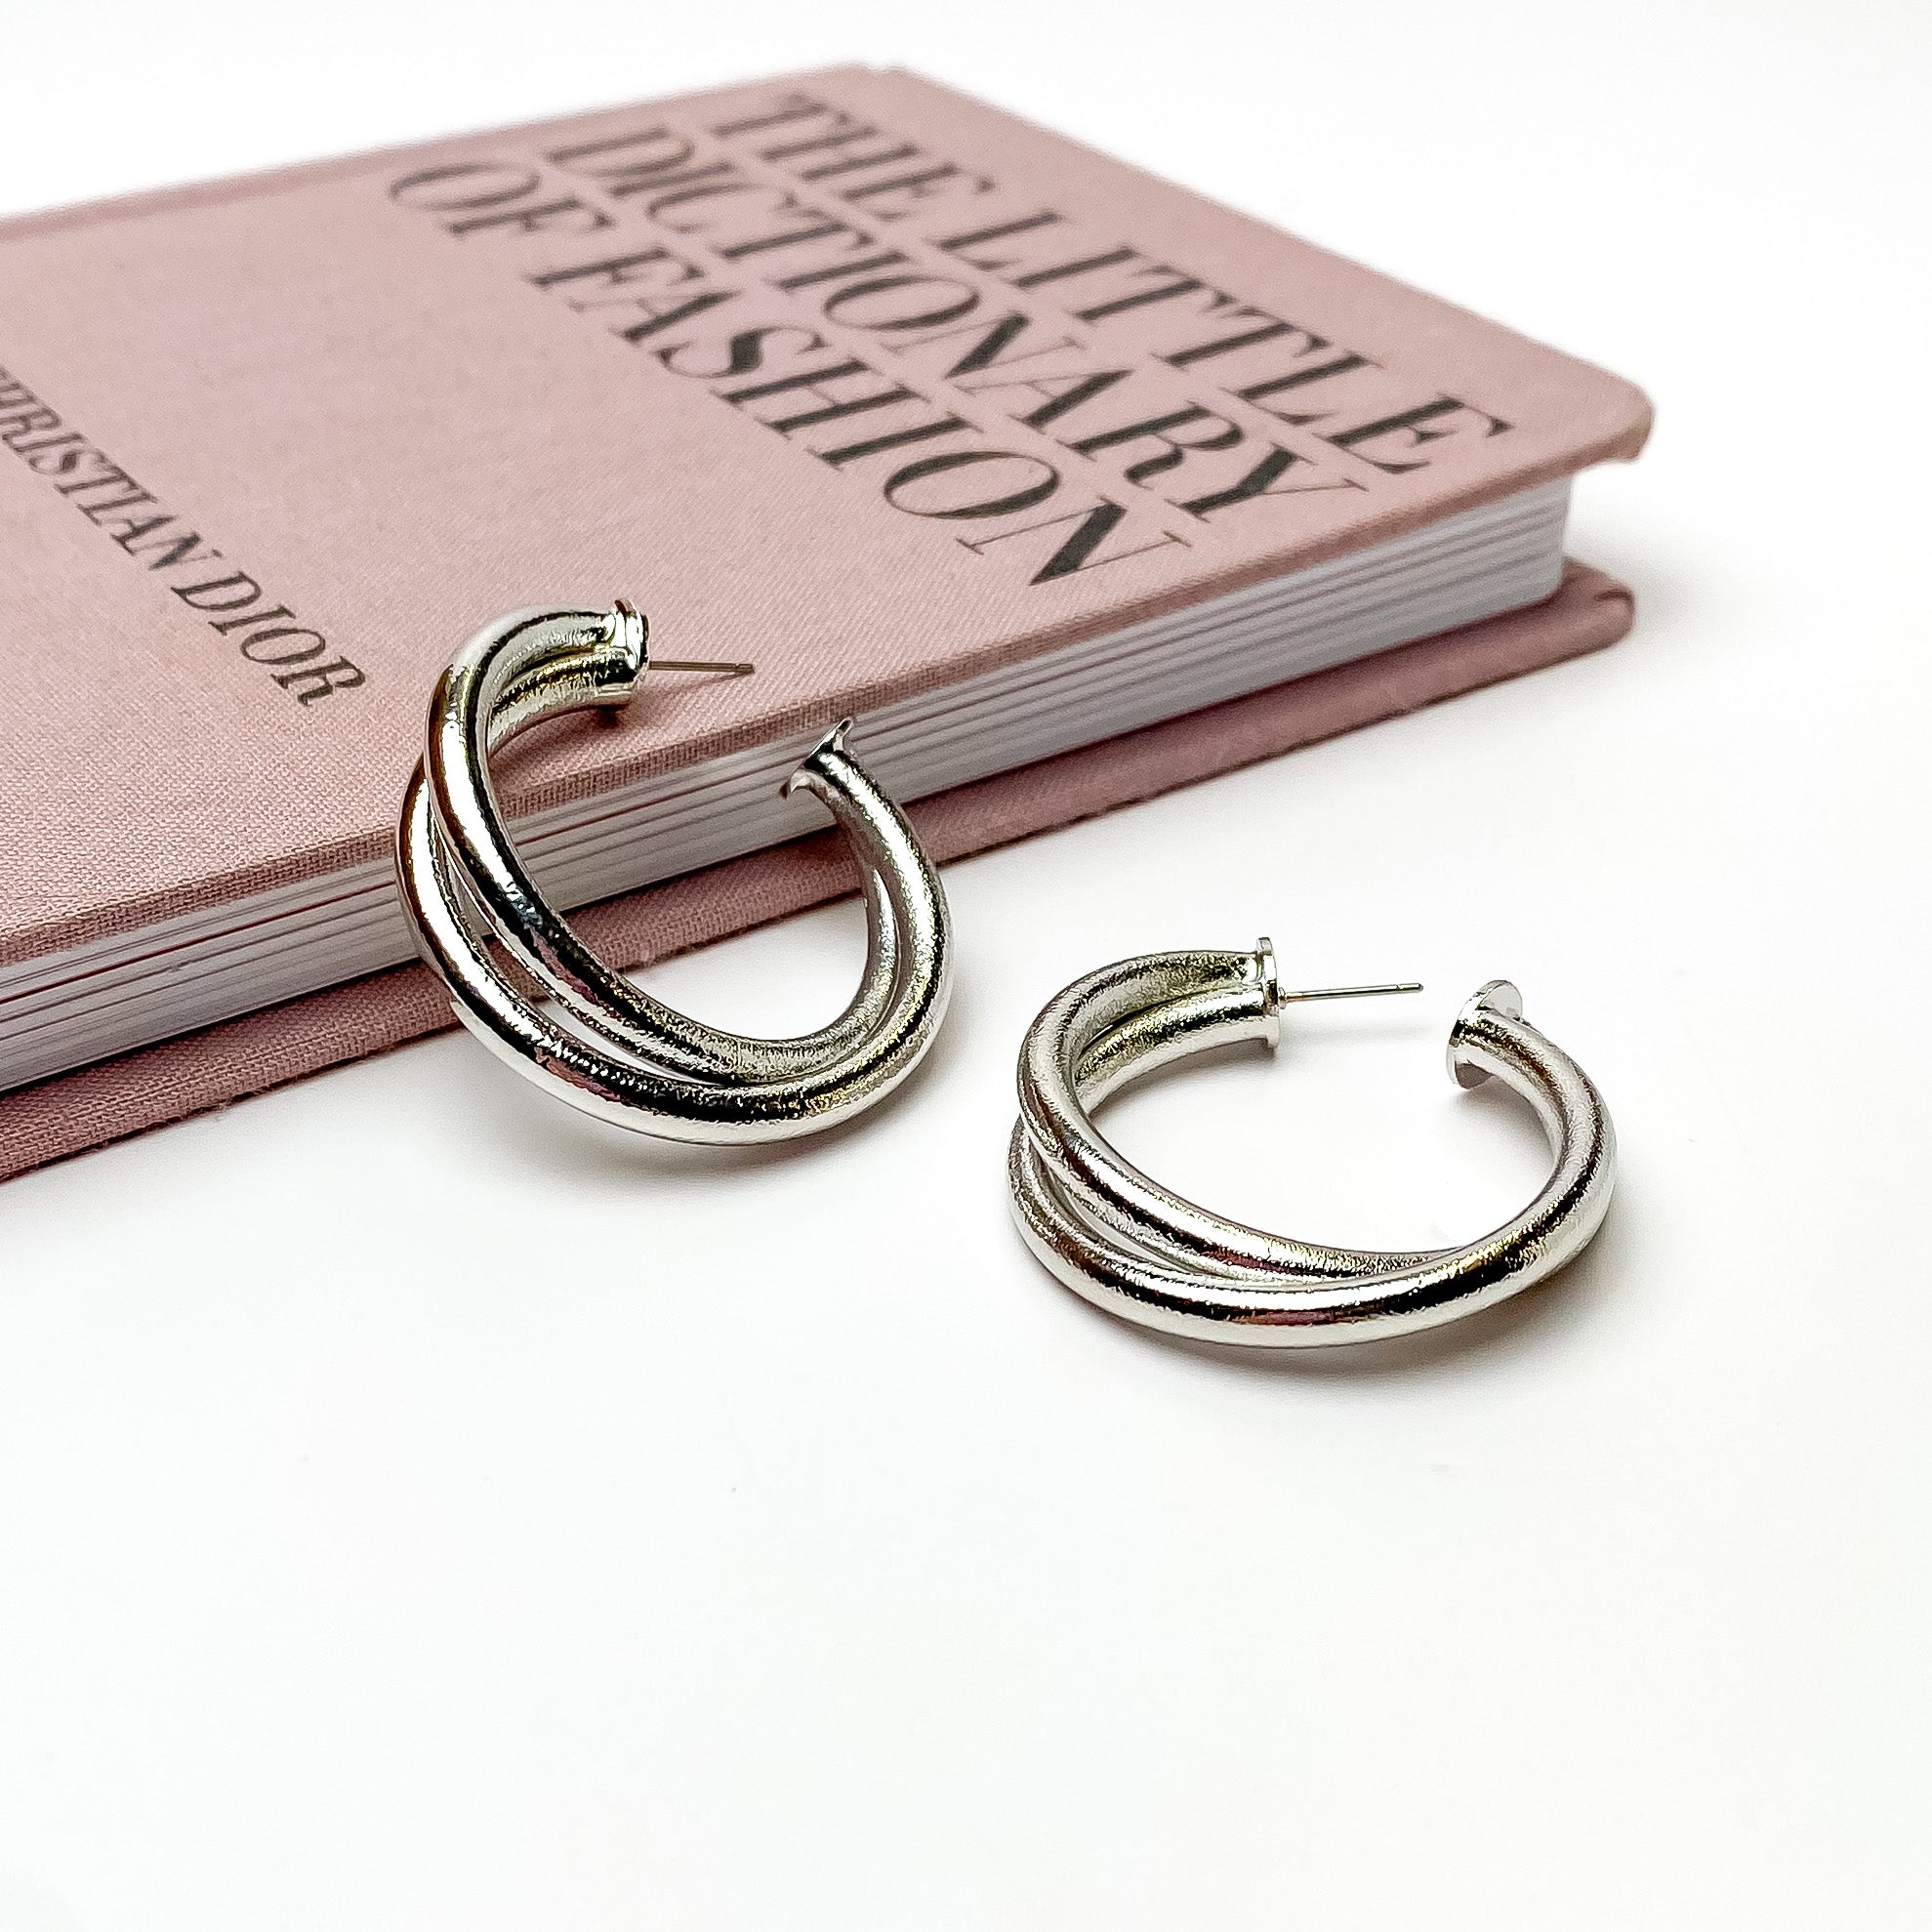 Silver, textured twisted hoop earrings. These earrings are pictured on a white background with one hoop is laying against a mauve colored book. 